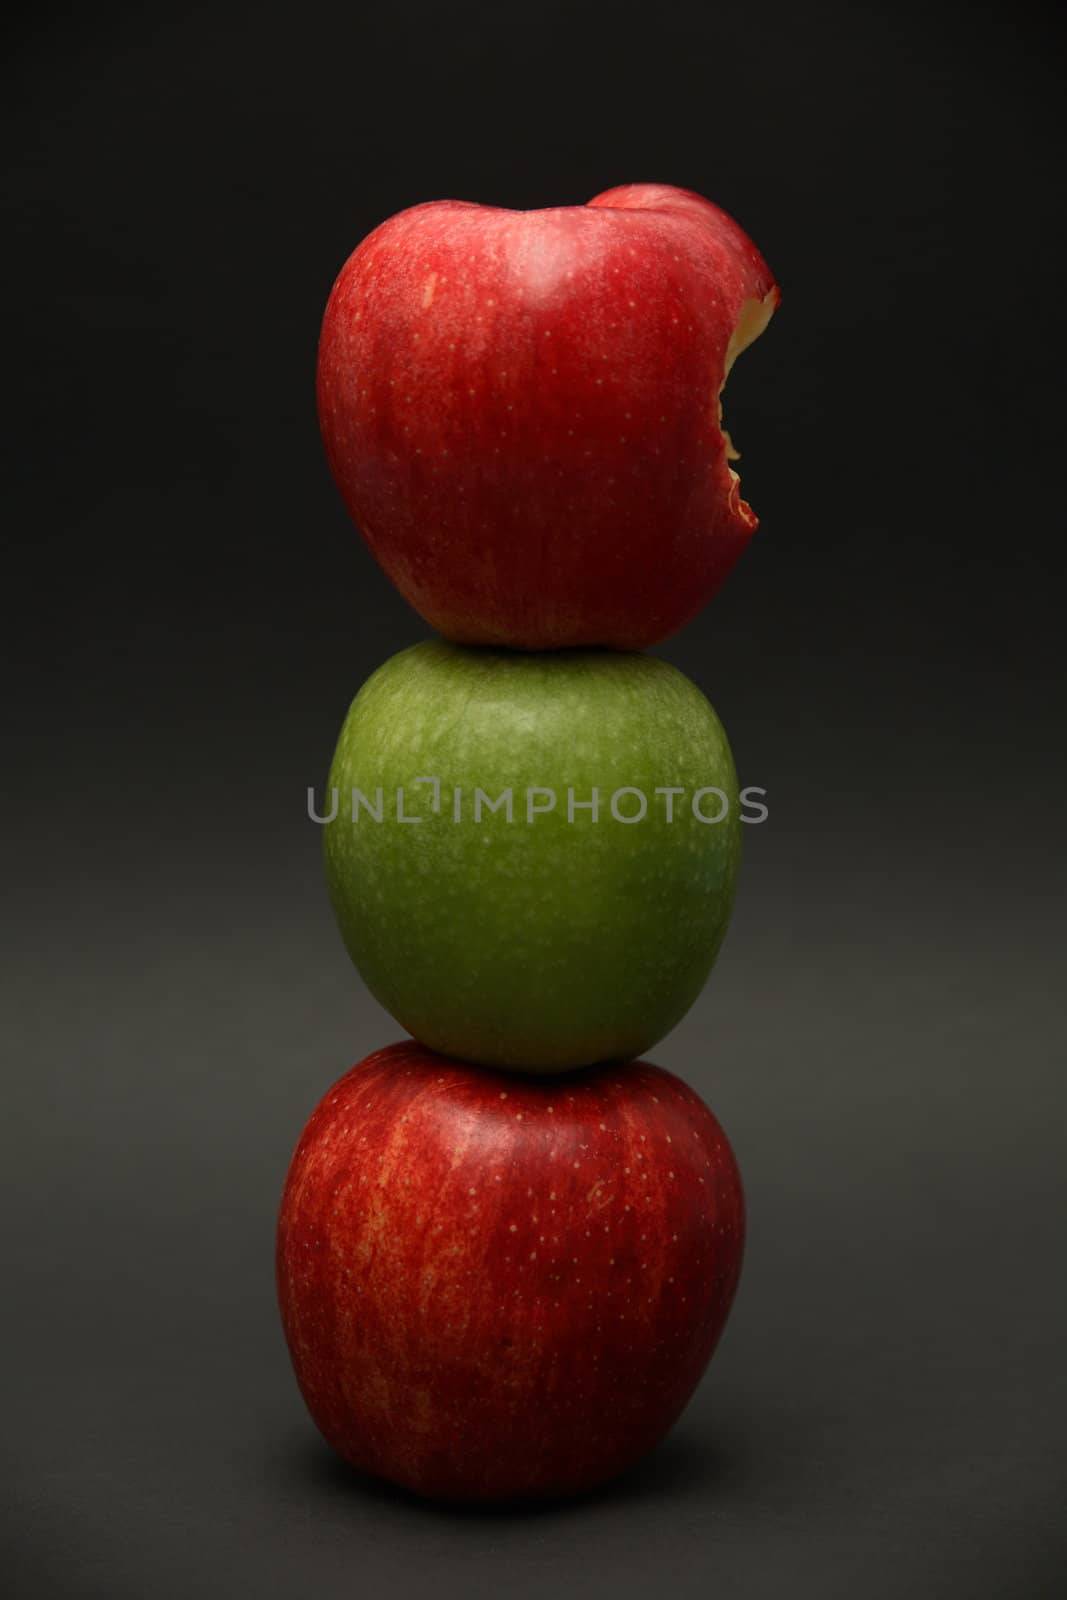 A line of apples with one exception.